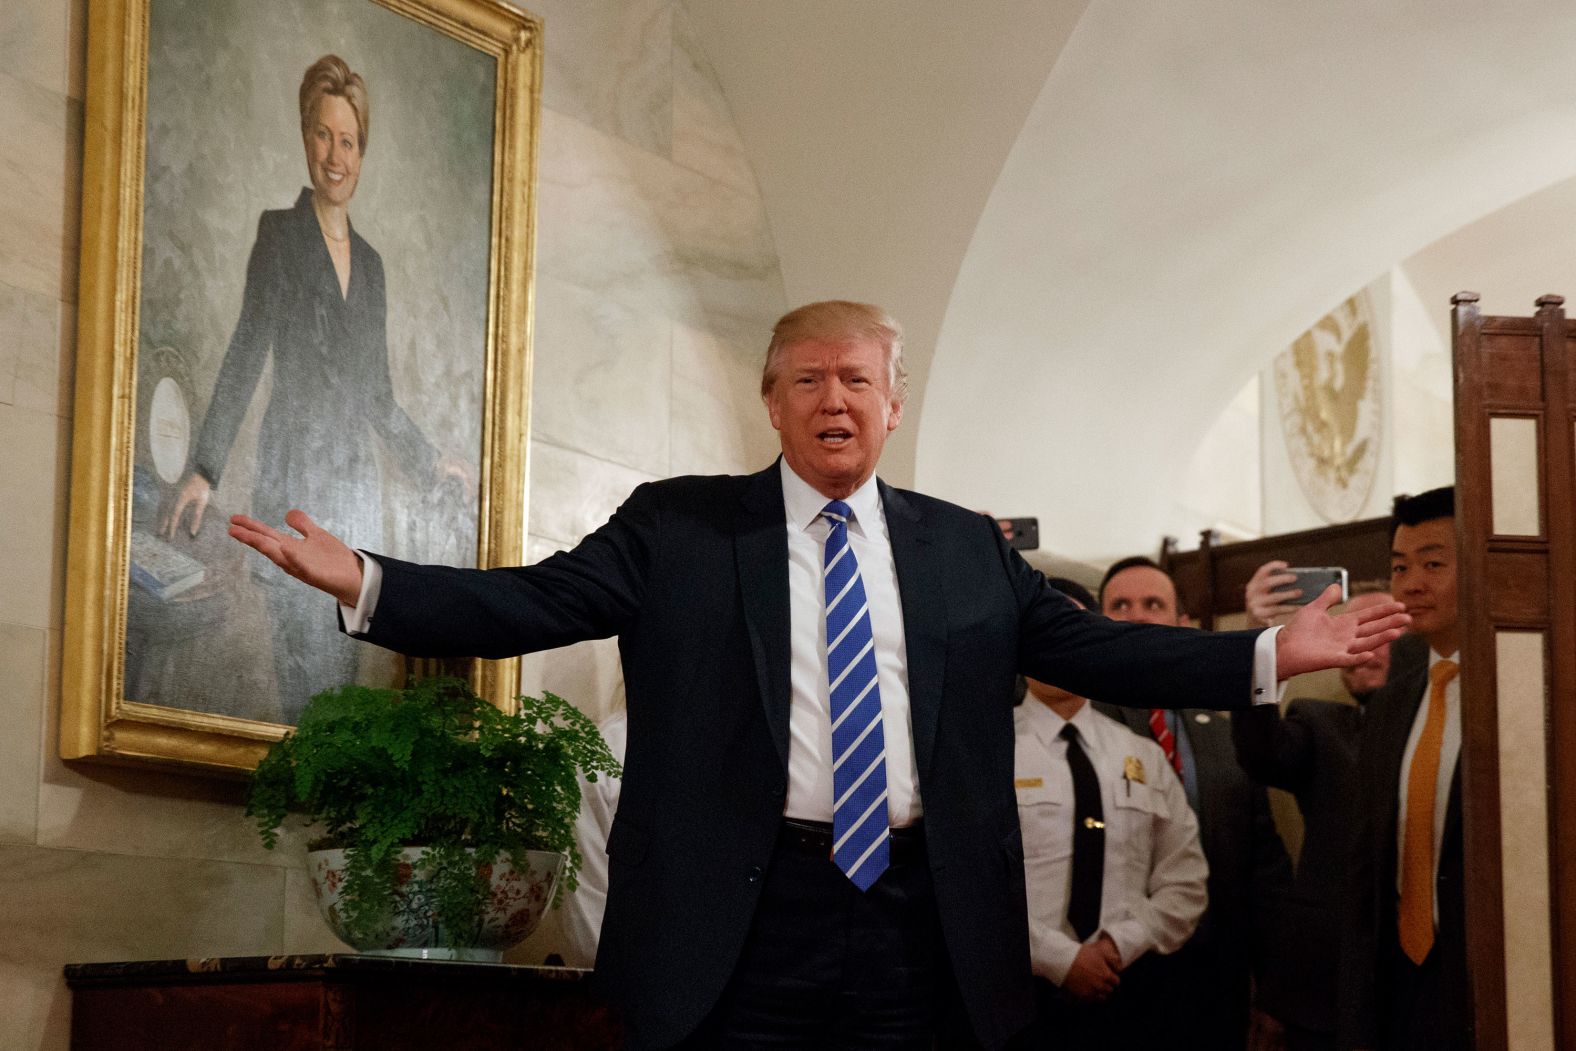 Trump, in front of a portrait of his 2016 opponent Hillary Clinton, <a href="index.php?page=&url=http%3A%2F%2Fwww.cnn.com%2F2017%2F03%2F07%2Fpolitics%2Ftrump-white-house-tour-surprise%2F" target="_blank">surprises visitors</a> who were touring the White House in March 2017. The tour group, including many young children, cheered and screamed after the president popped out from behind a room divider.